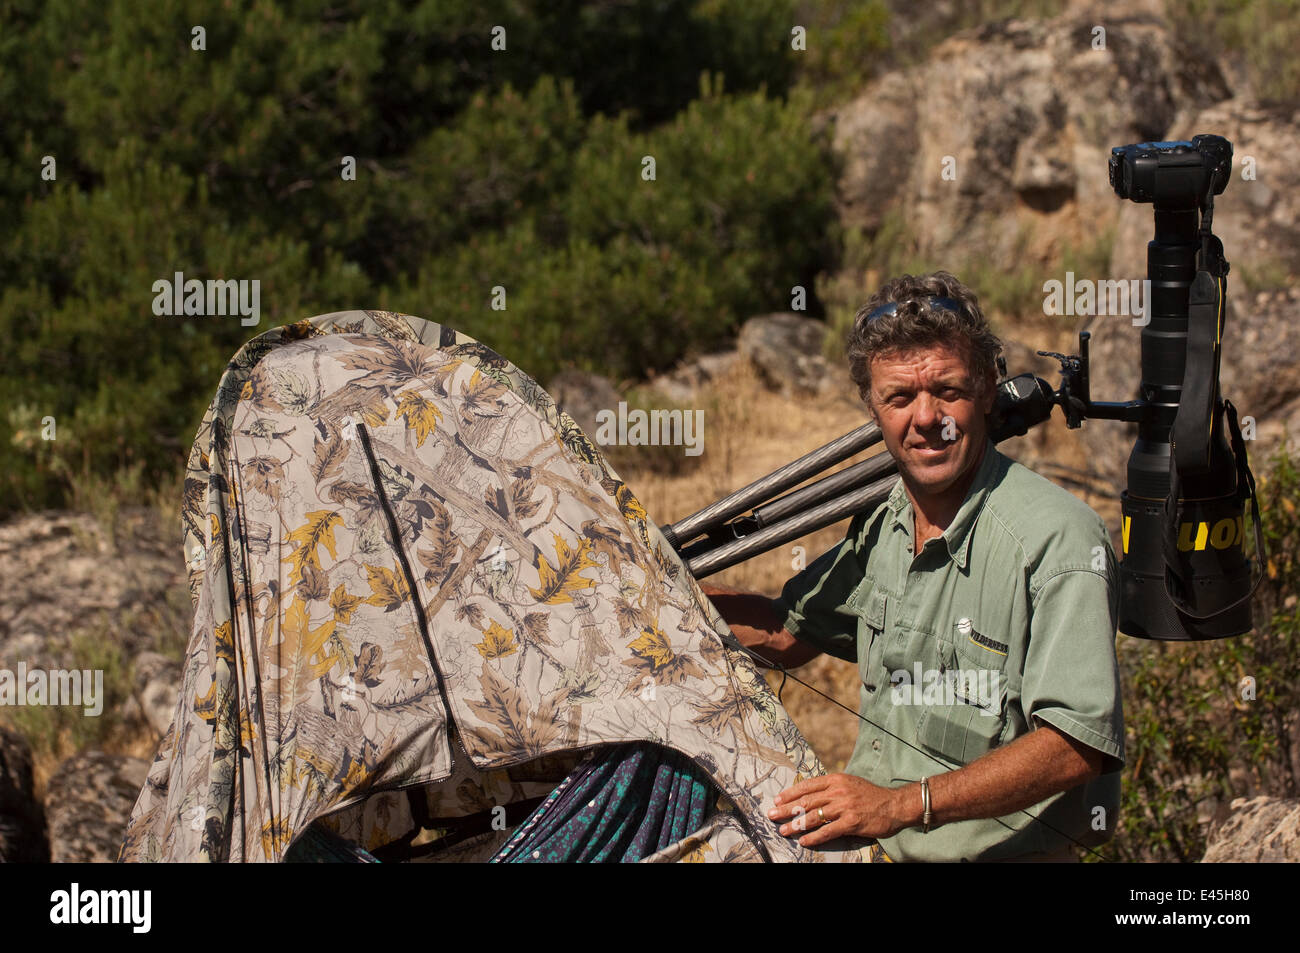 Photographer, Pete Oxford, next to hide, Sierra de Andújar Natural Park, Mediterranean woodland of Sierra Morena, north east Jaén Province, Andalusia, Spain, May 2009 Stock Photo